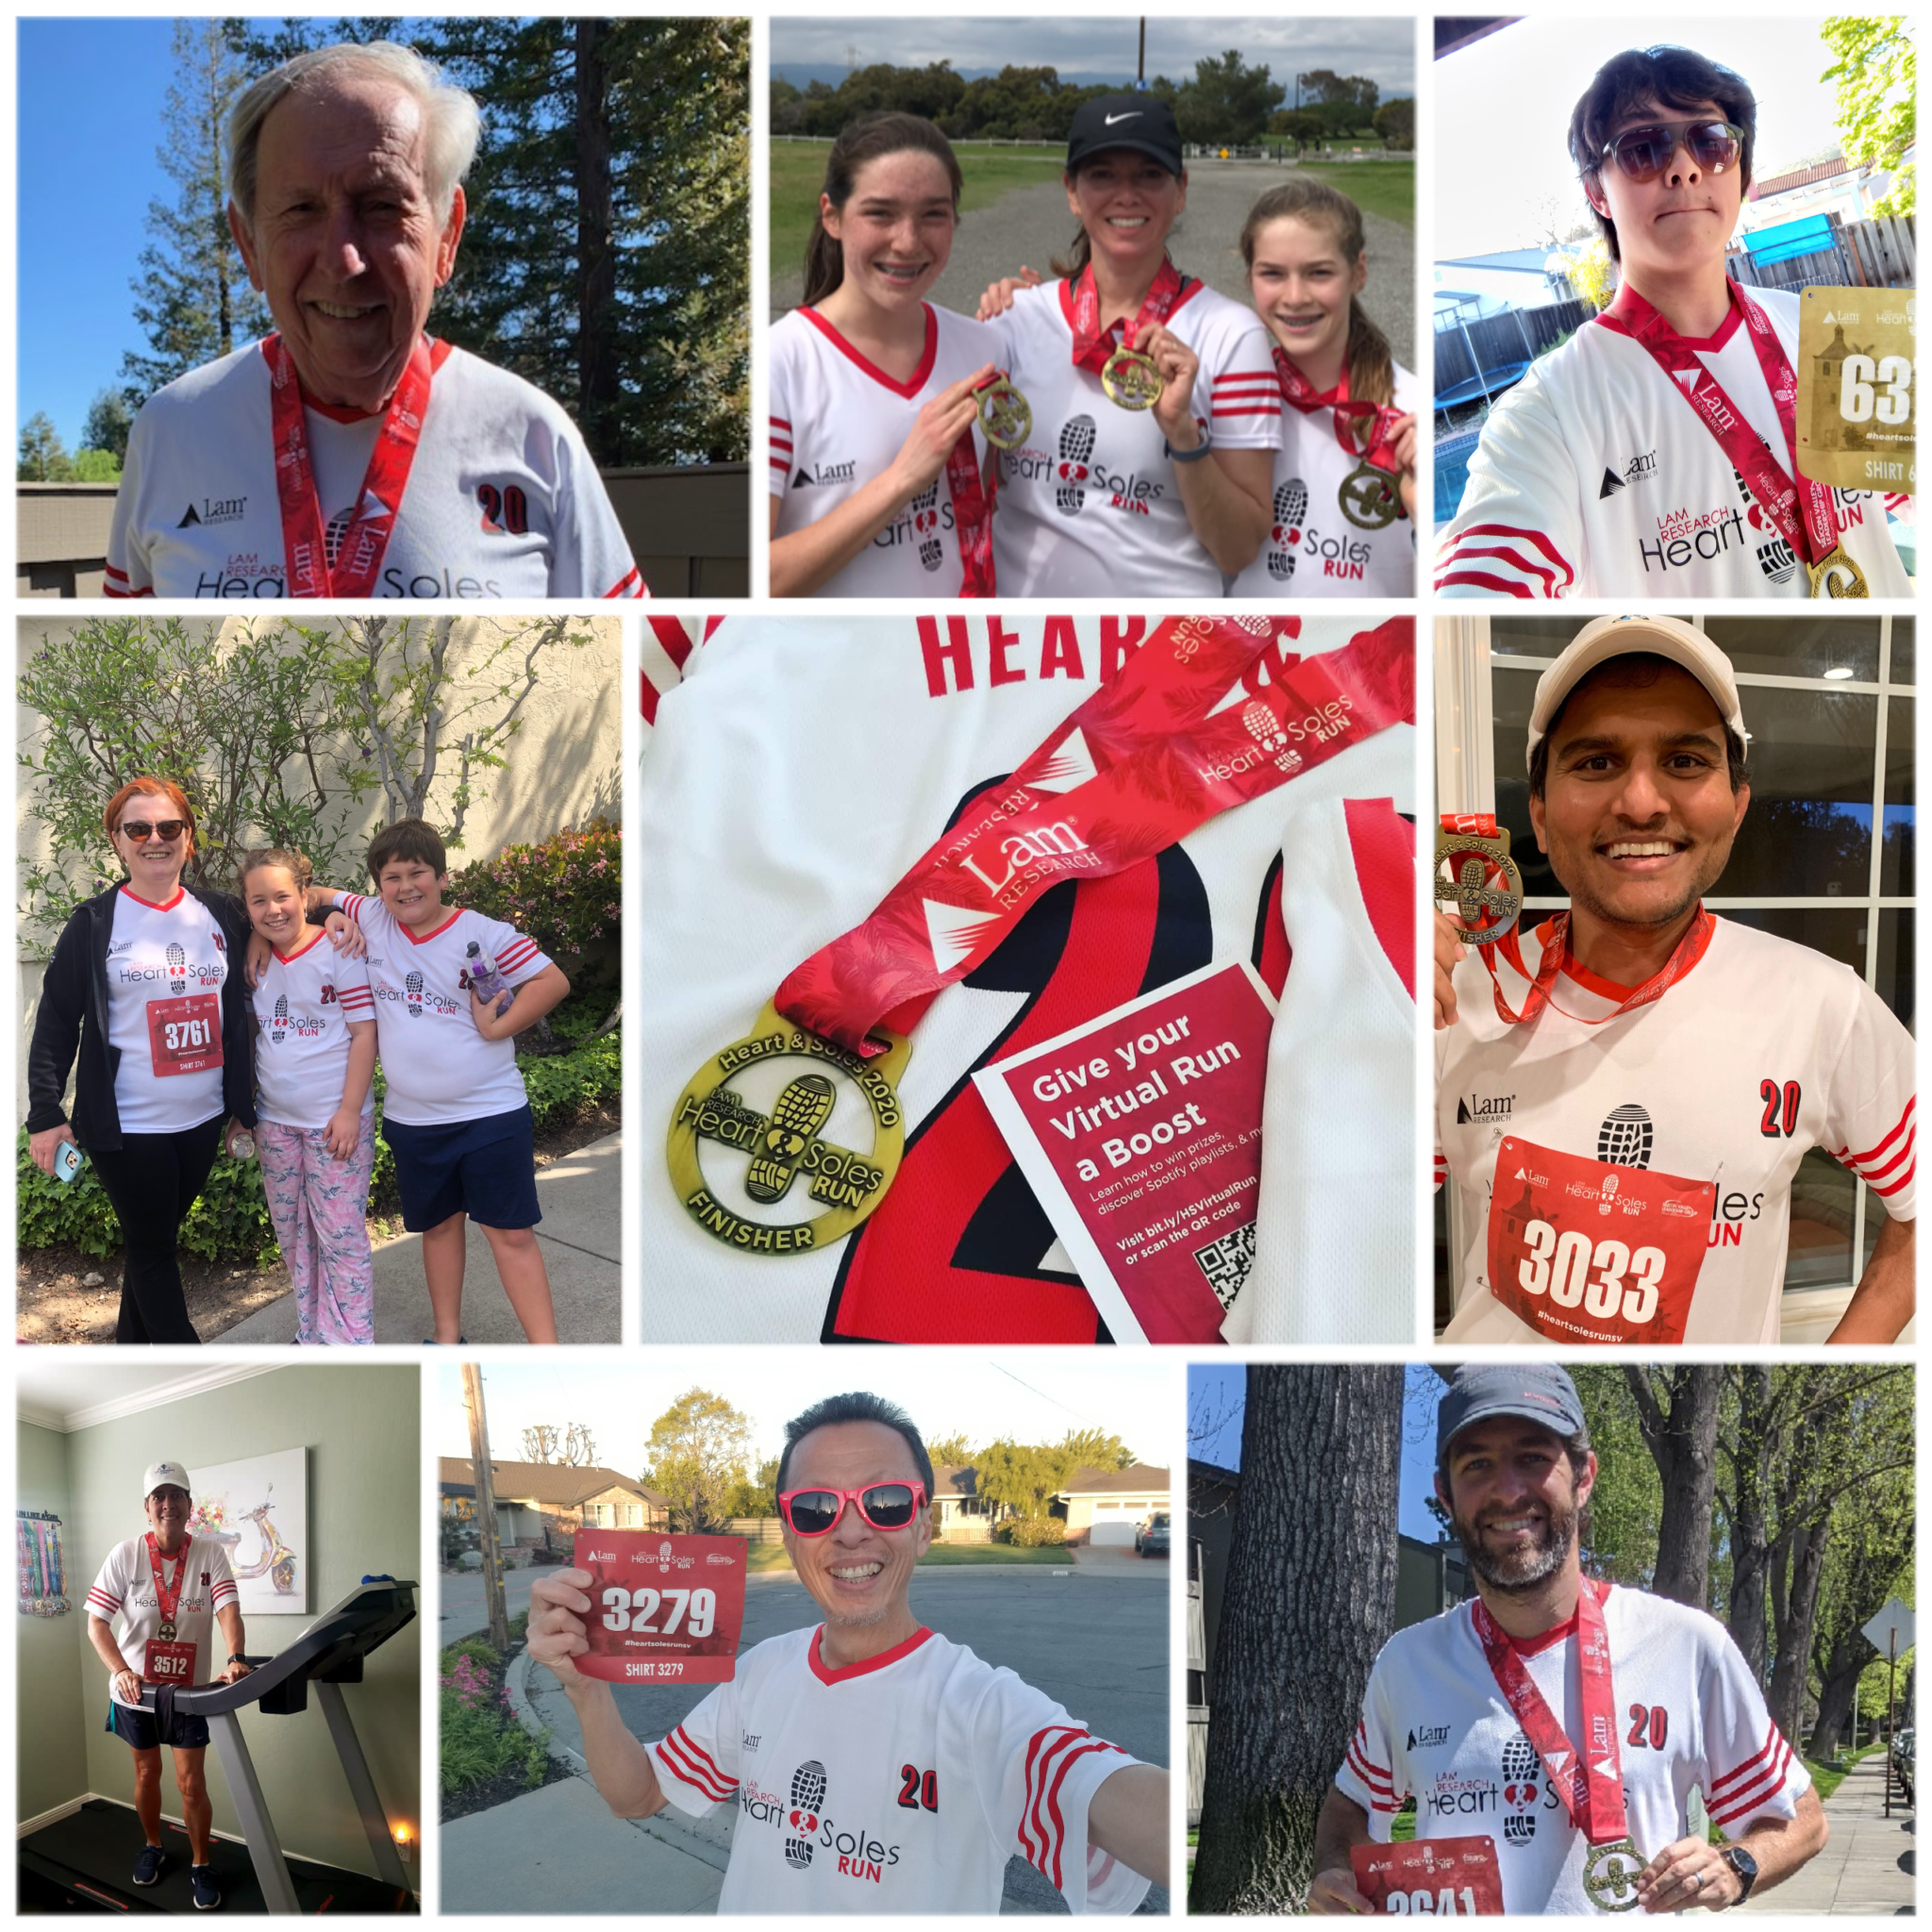 various photos of people in their running bib and medal